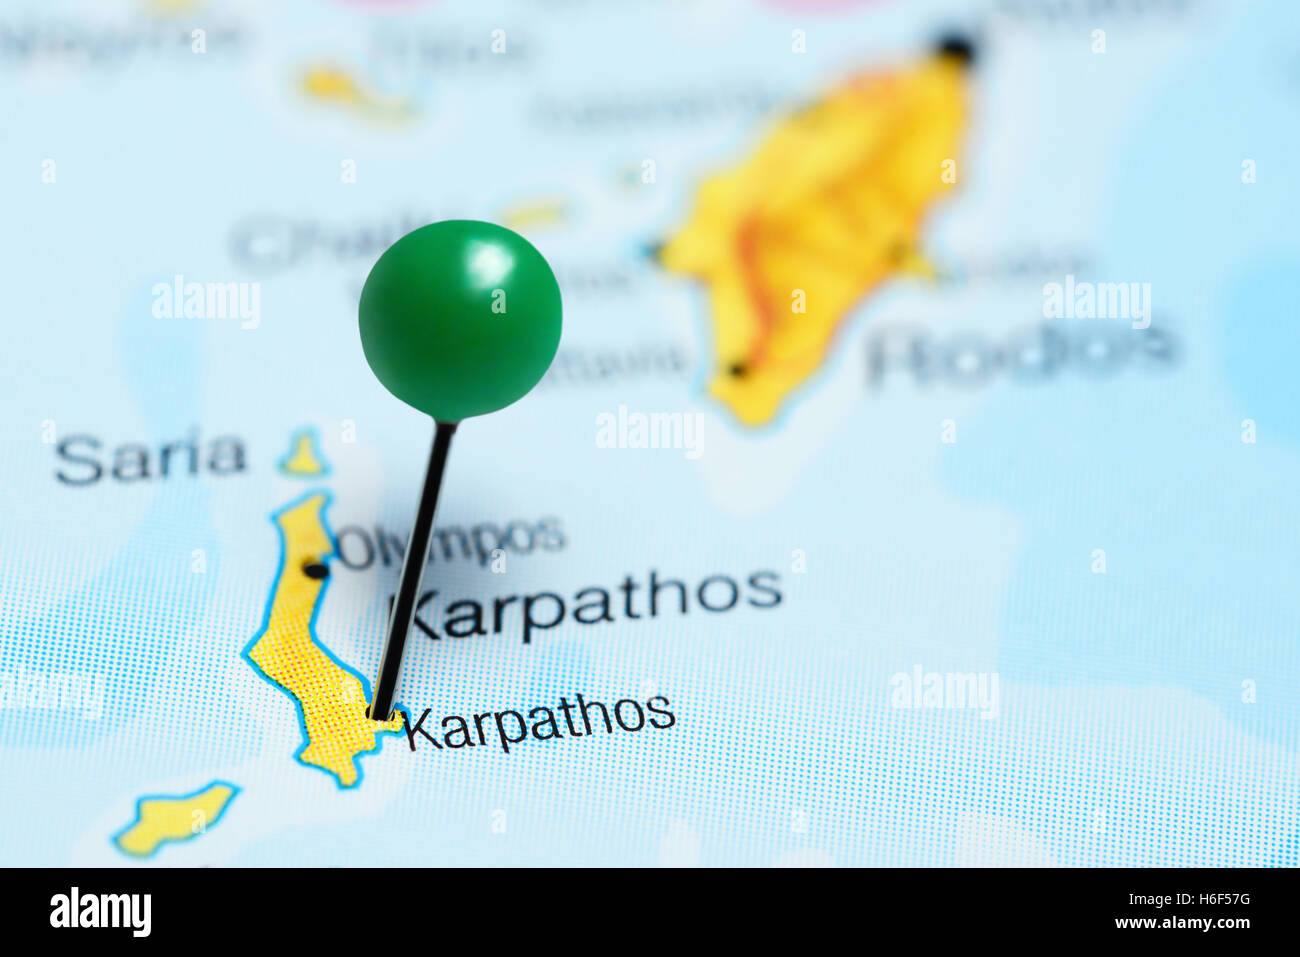 Karpathos pinned on a map of Greece Stock Photo